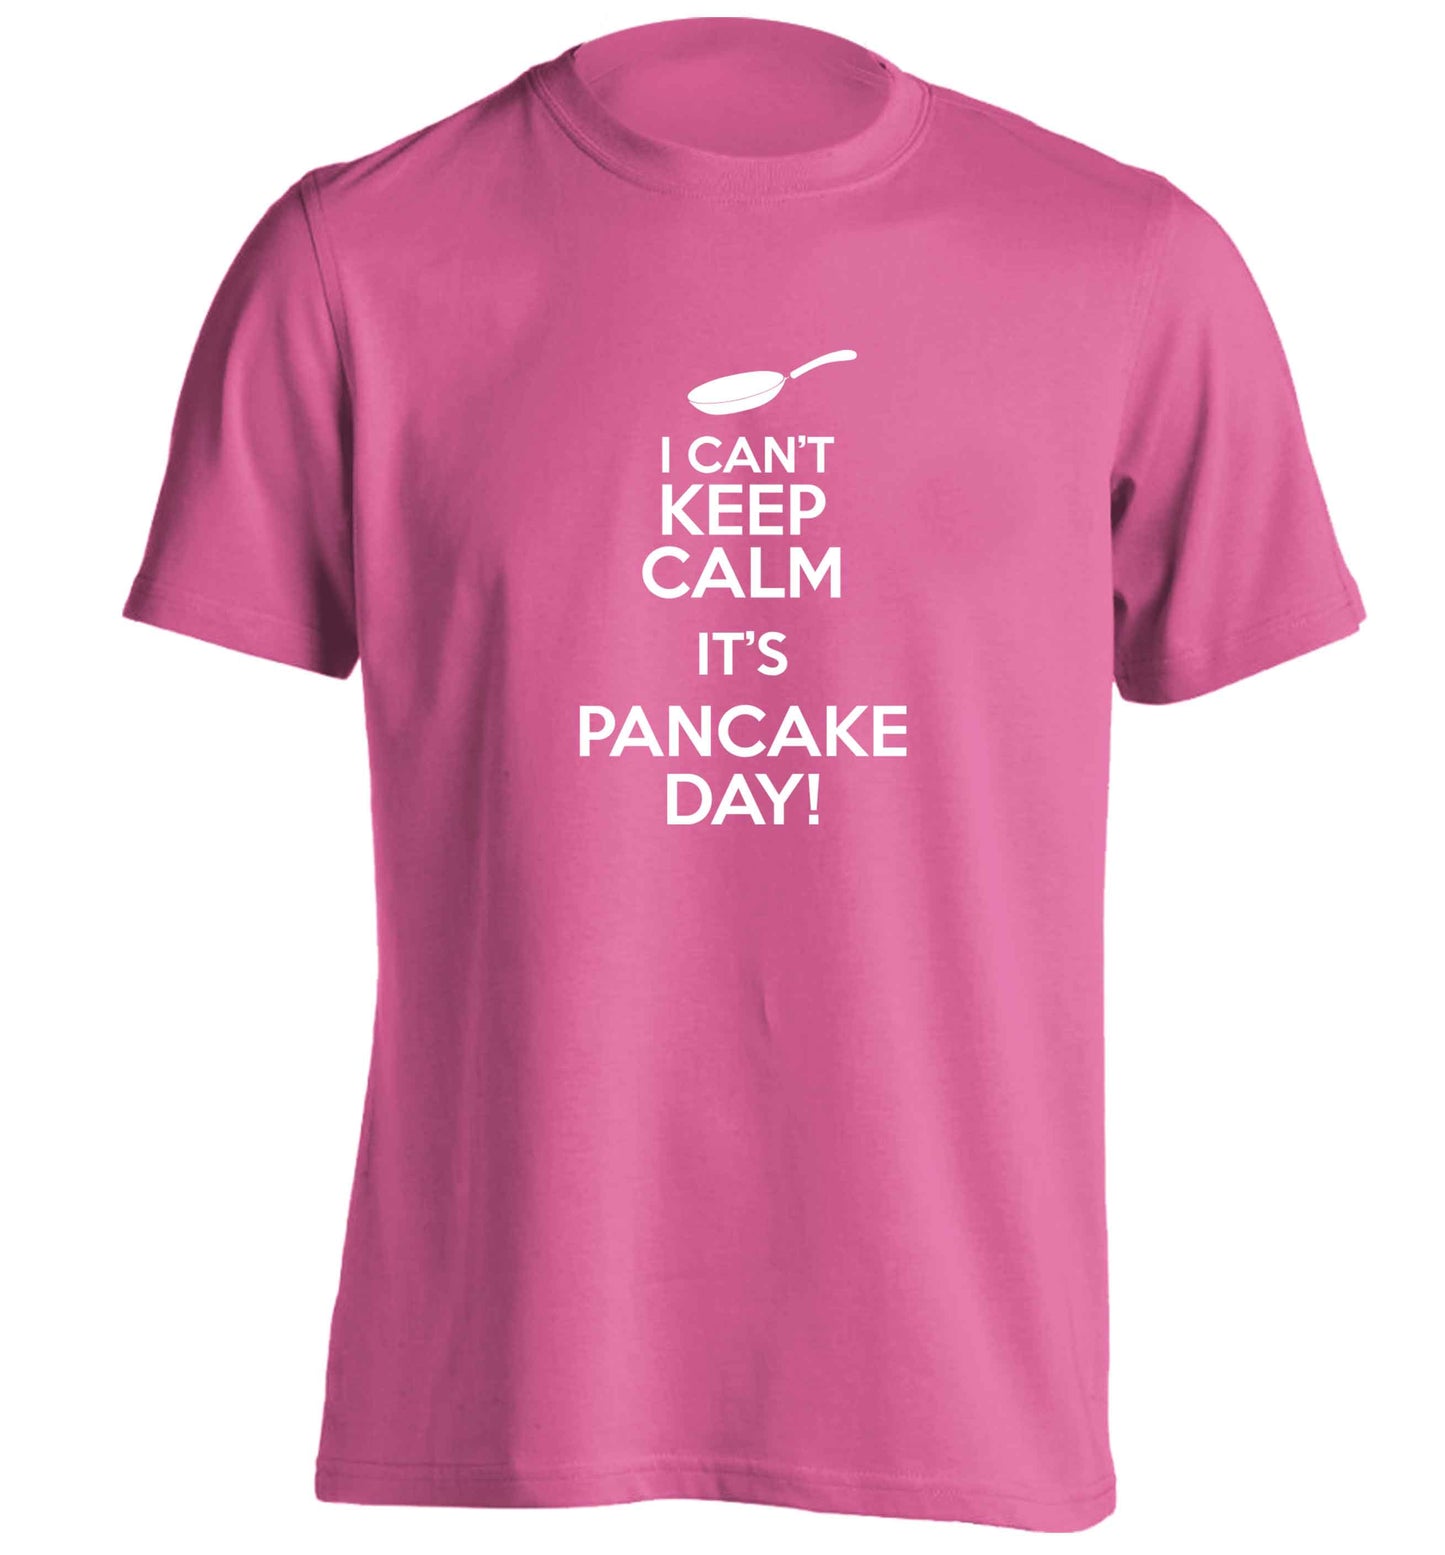 I can't keep calm it's pancake day! adults unisex pink Tshirt 2XL